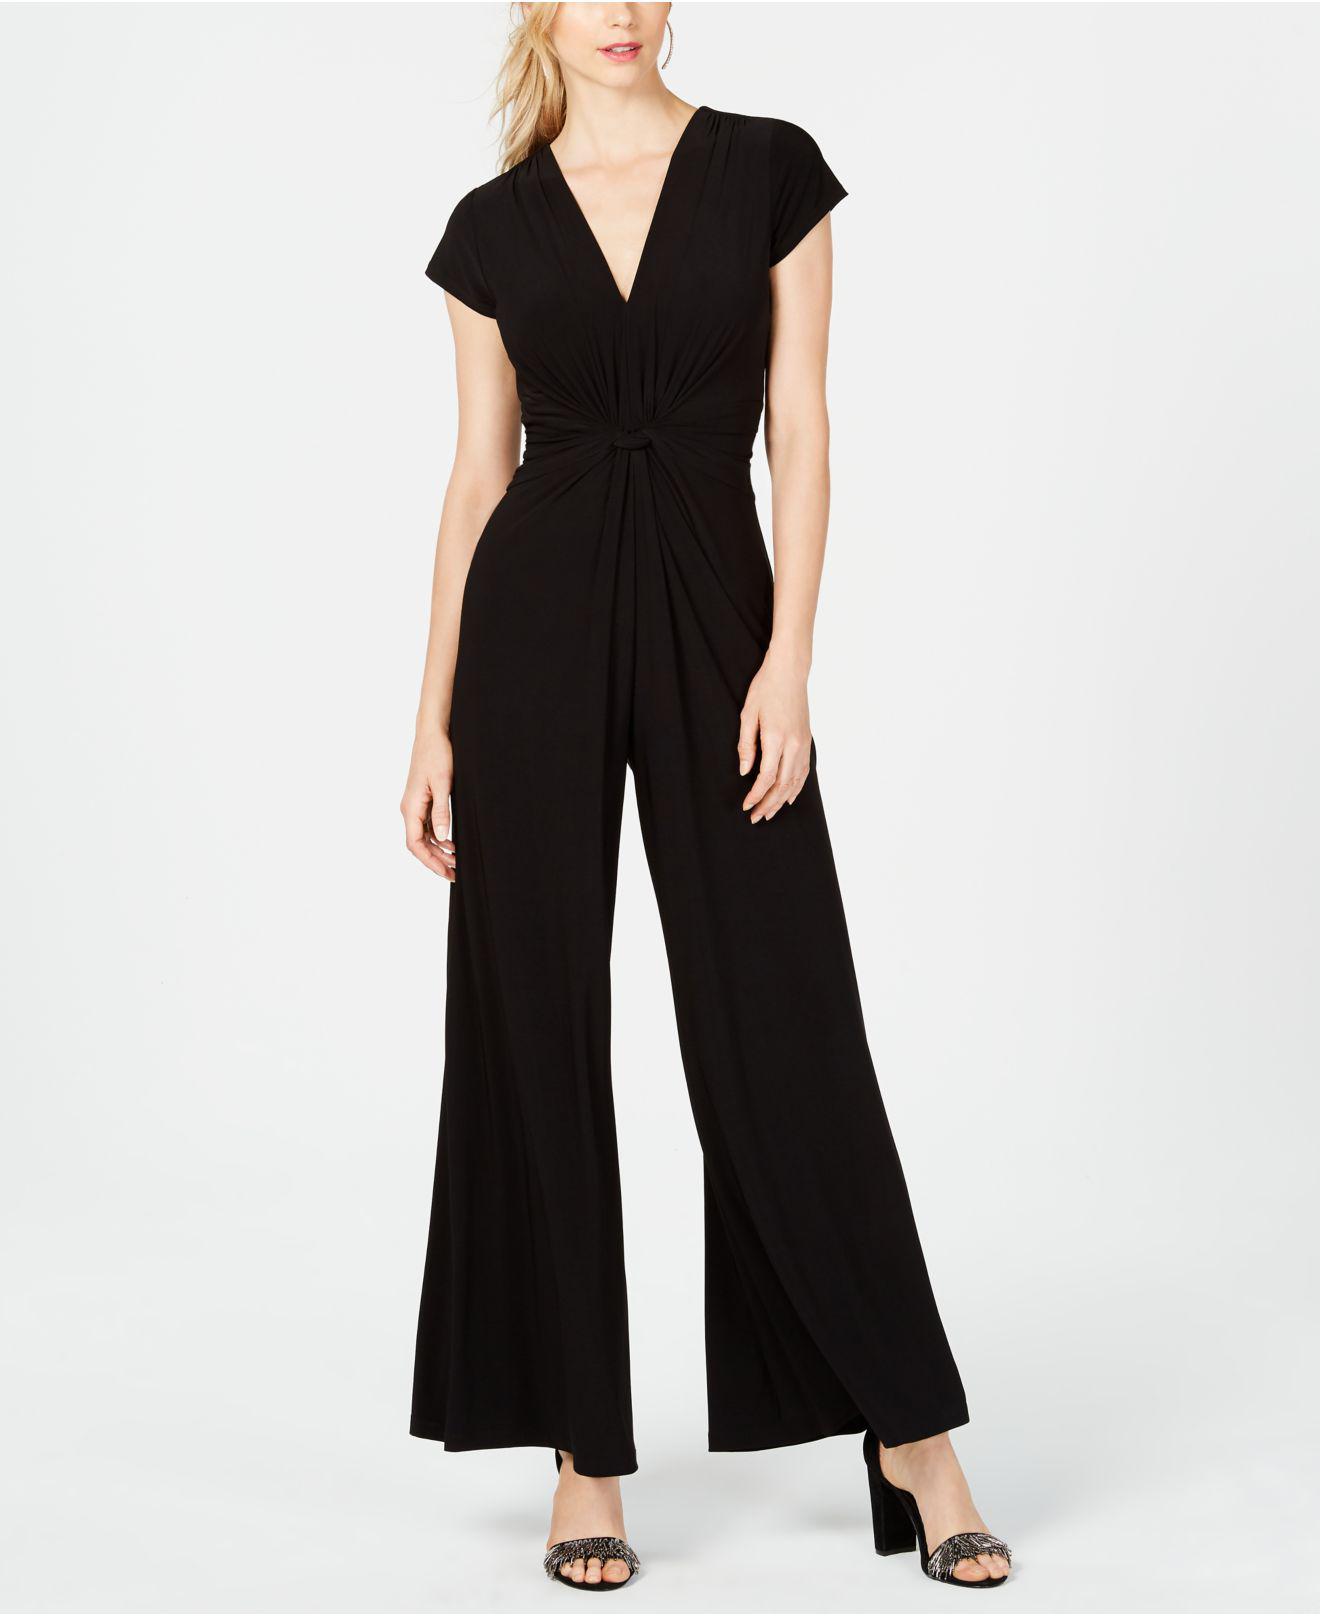 Vince Camuto Synthetic Twist-front Plunge Jumpsuit in Black - Lyst